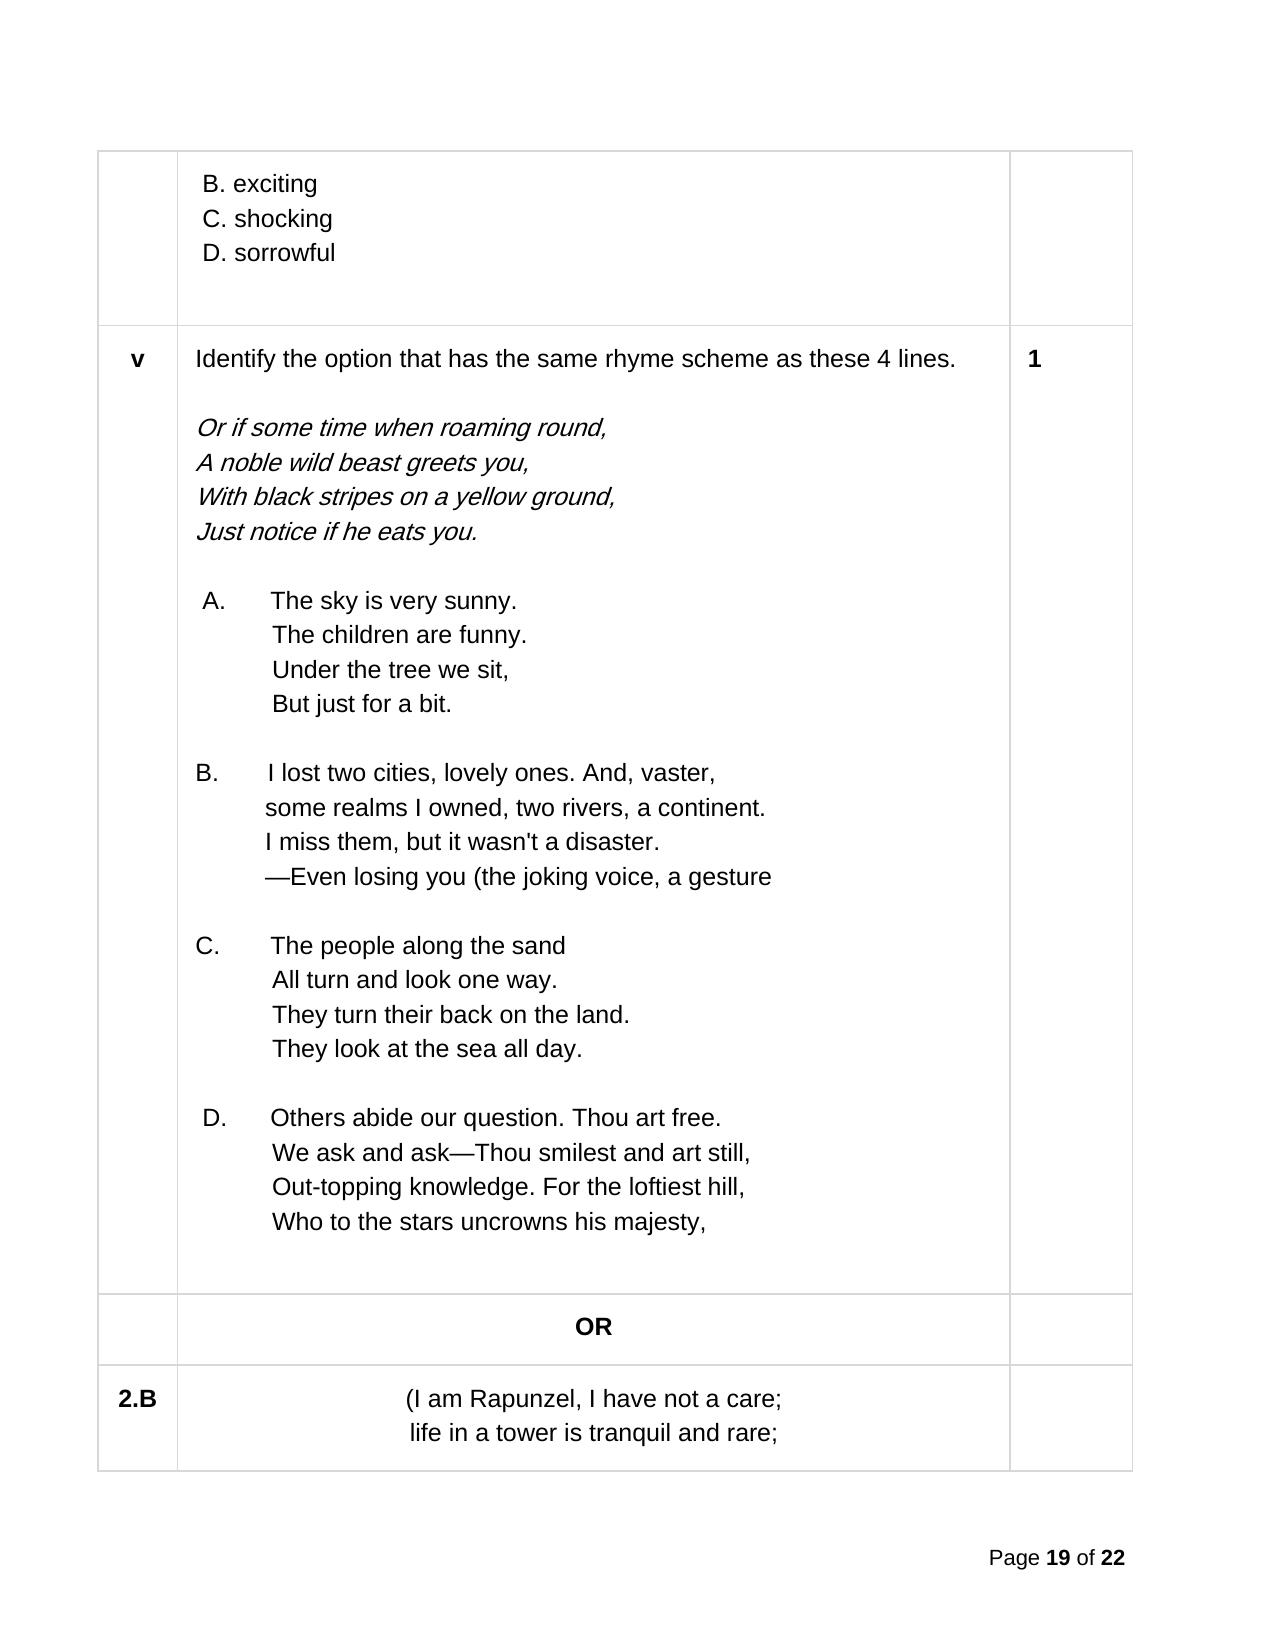 CBSE Class 10 English Practice Questions 2022-23 - Page 19